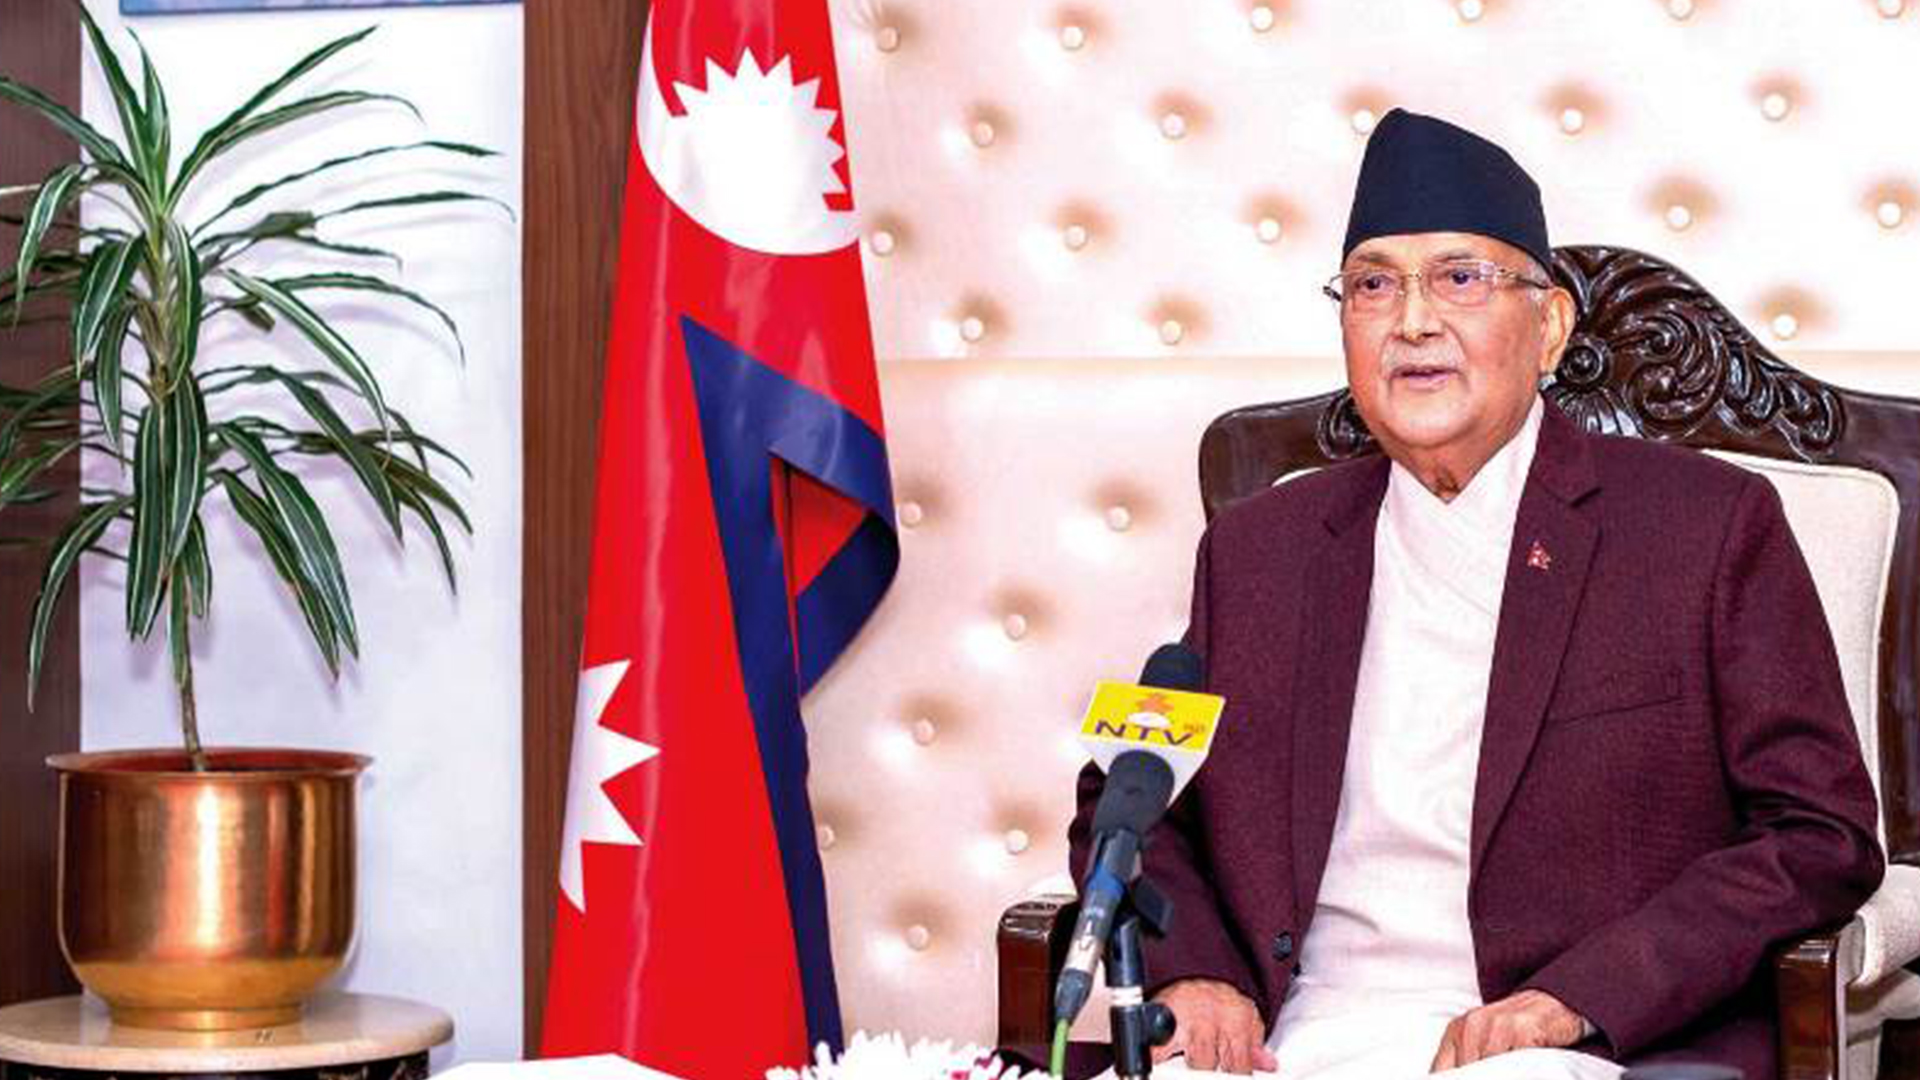 PM KP Sharma Oli to address nation at 3 pm today